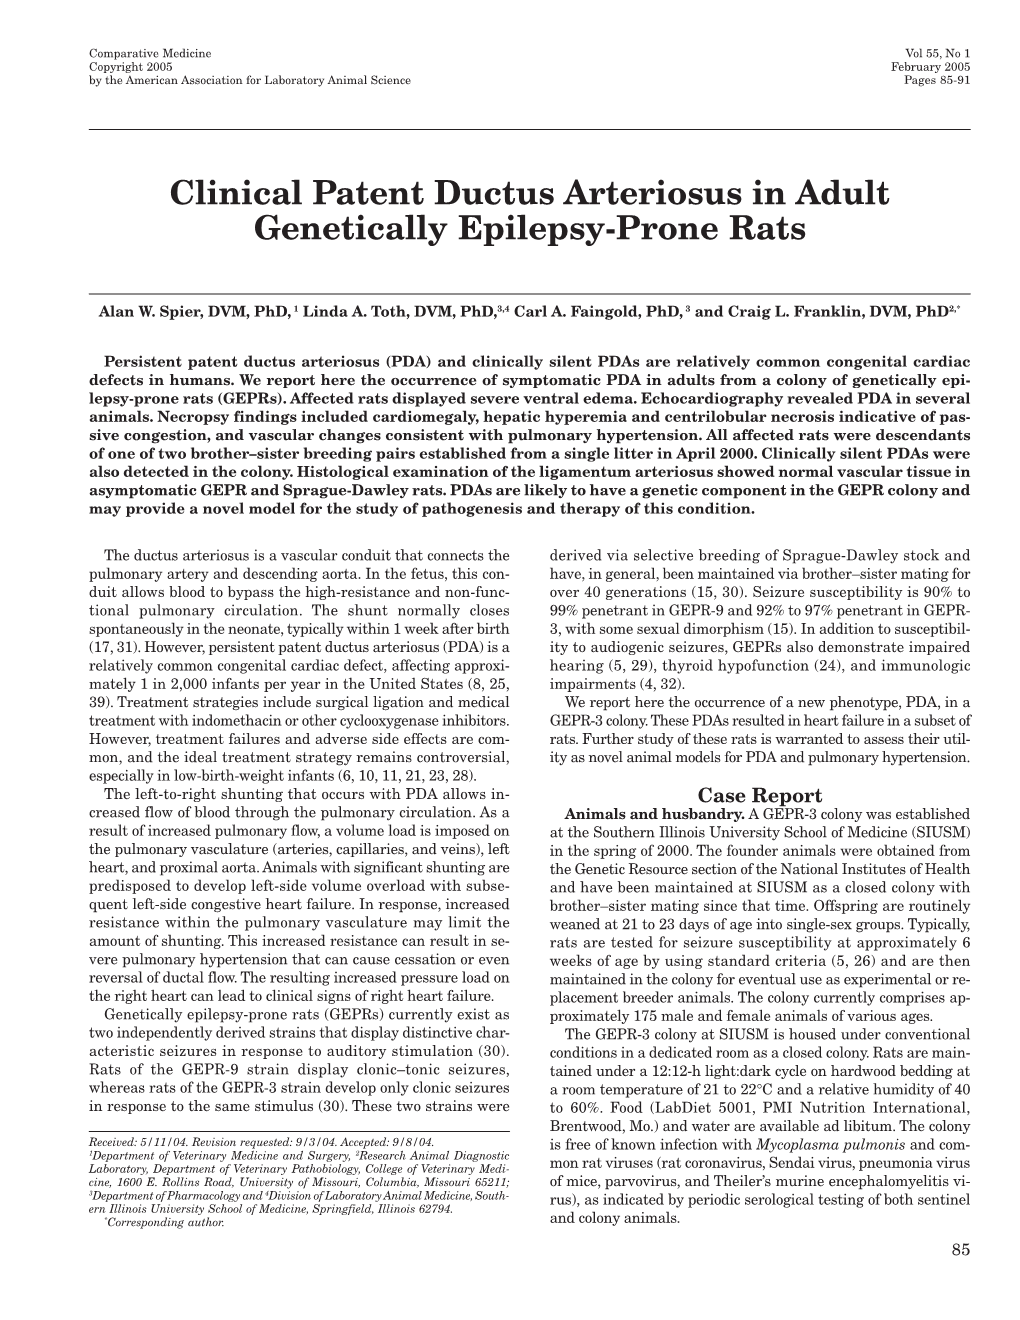 Clinical Patent Ductus Arteriosus in Adult Genetically Epilepsy-Prone Rats